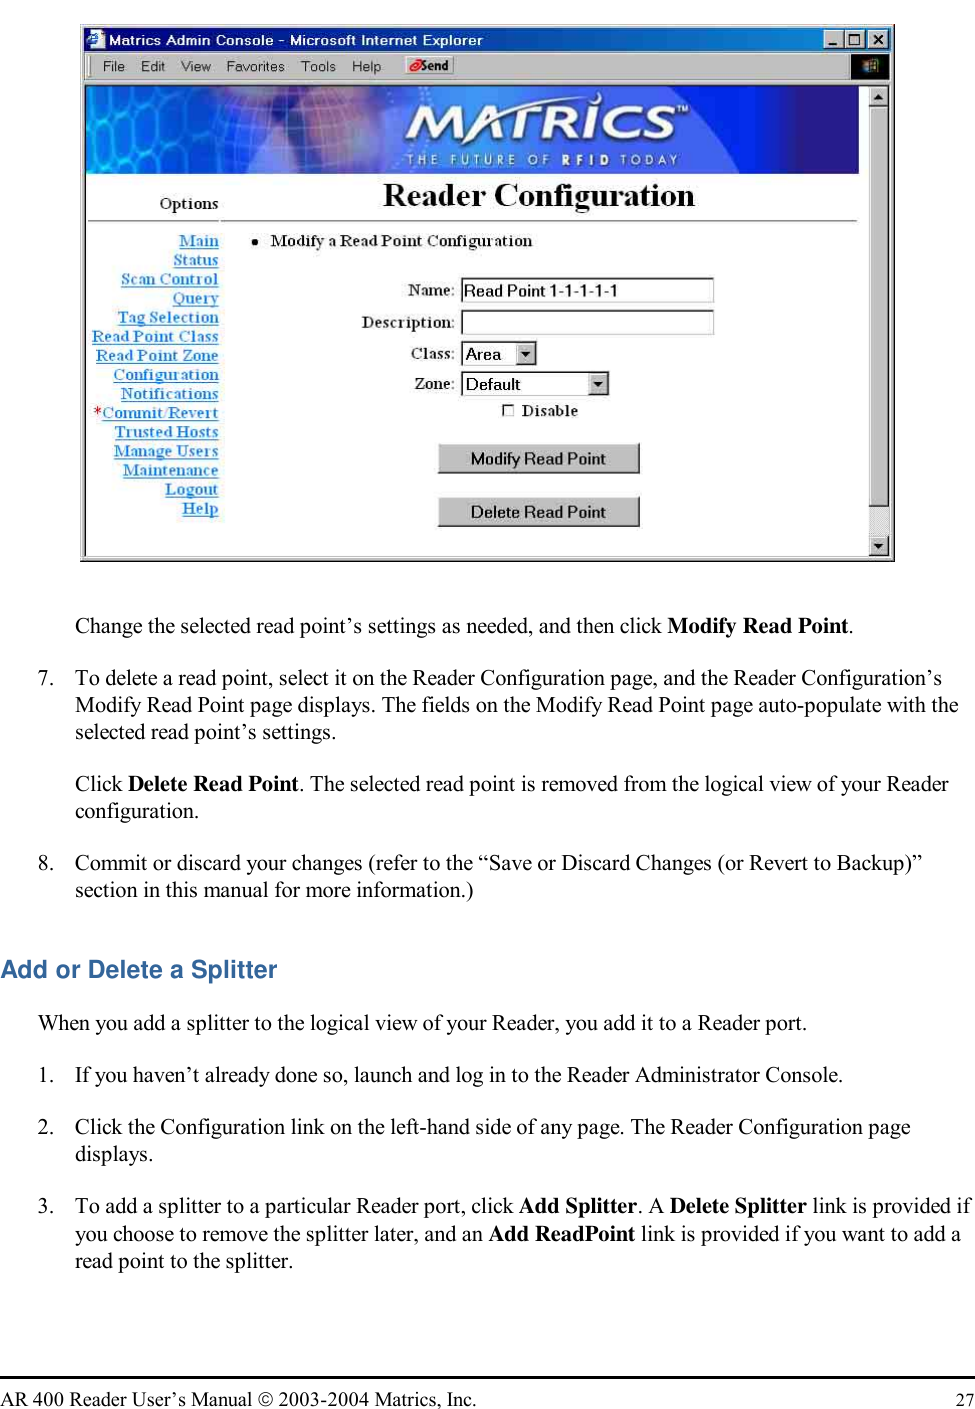   AR 400 Reader User’s Manual  2003-2004 Matrics, Inc.  27  Change the selected read point’s settings as needed, and then click Modify Read Point. 7.  To delete a read point, select it on the Reader Configuration page, and the Reader Configuration’s Modify Read Point page displays. The fields on the Modify Read Point page auto-populate with the selected read point’s settings. Click Delete Read Point. The selected read point is removed from the logical view of your Reader configuration. 8.  Commit or discard your changes (refer to the “Save or Discard Changes (or Revert to Backup)” section in this manual for more information.) Add or Delete a Splitter When you add a splitter to the logical view of your Reader, you add it to a Reader port.  1.  If you haven’t already done so, launch and log in to the Reader Administrator Console. 2.  Click the Configuration link on the left-hand side of any page. The Reader Configuration page displays. 3.  To add a splitter to a particular Reader port, click Add Splitter. A Delete Splitter link is provided if you choose to remove the splitter later, and an Add ReadPoint link is provided if you want to add a read point to the splitter.  